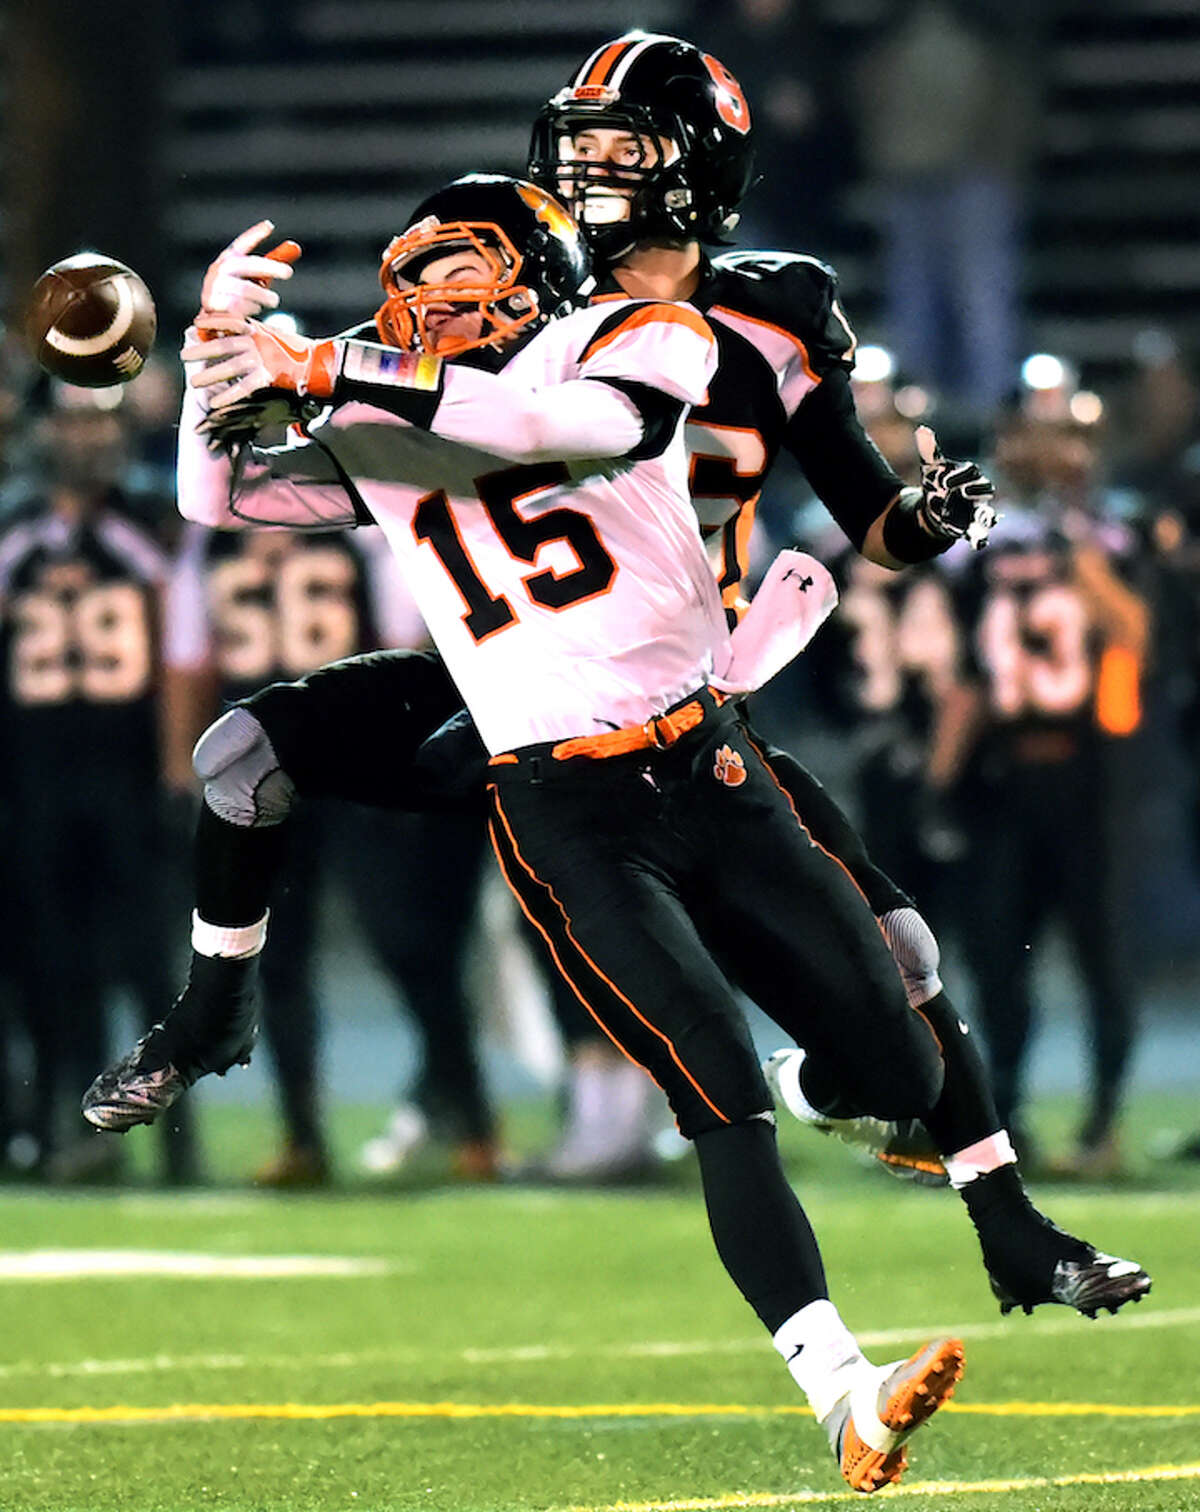 Defensive back Aidan Spearman of Ridgefield H.S. knocks down a pass intended for wide receiver Anthony Schiavo of Shelton H.S. during second quarter Class LL Semifinal football at Shelton H.S. Monday evening, December 5, 2016. (Peter Hvizdak – New Haven Register)